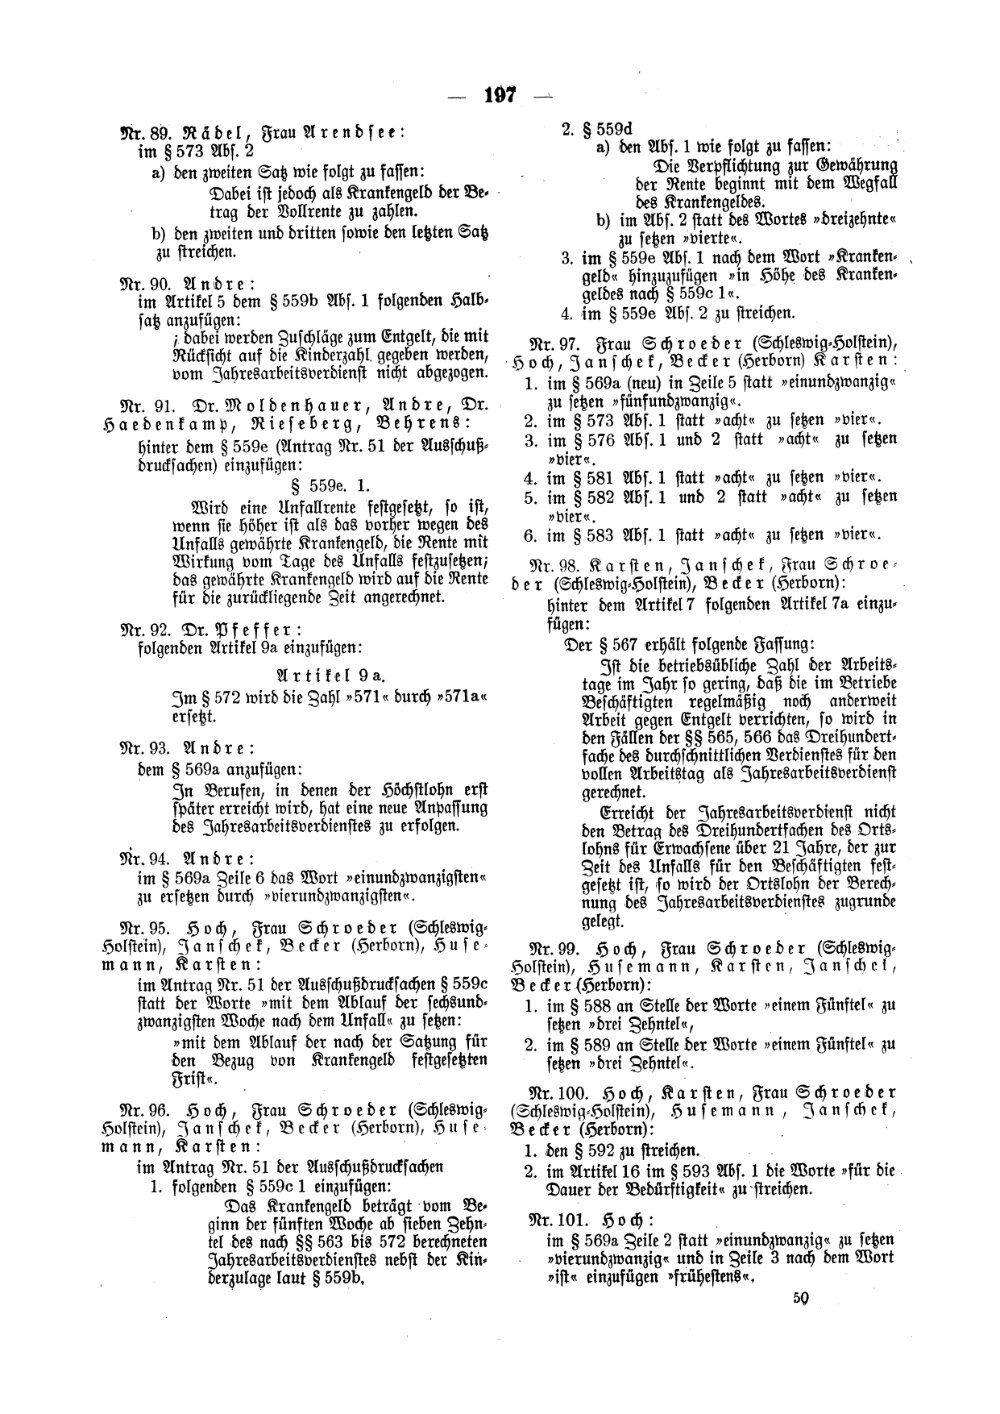 Scan of page 197